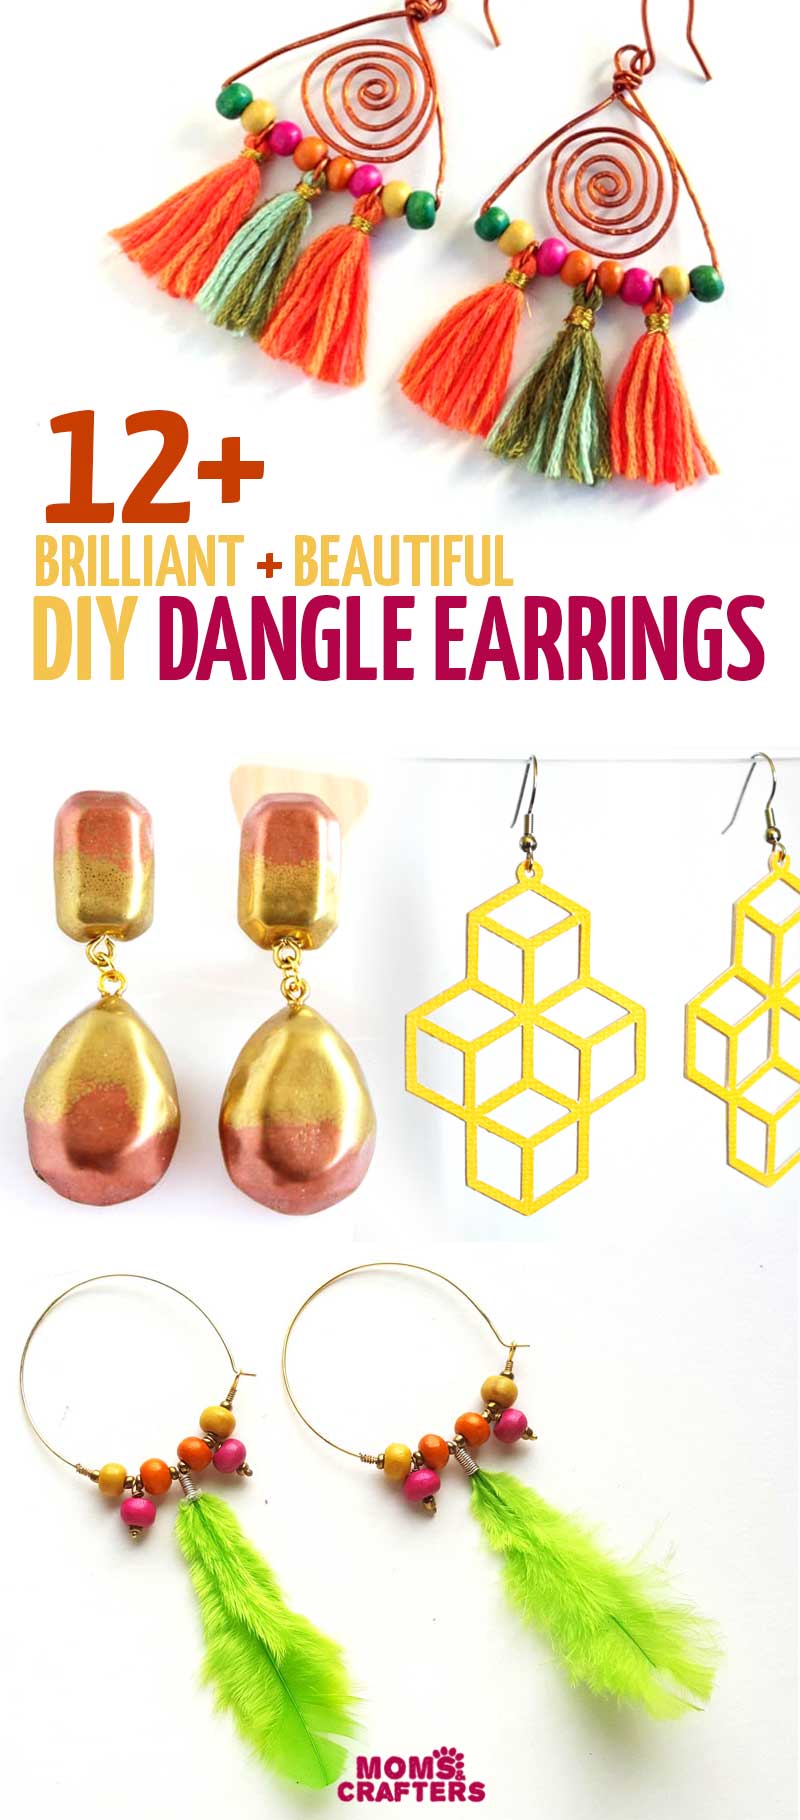 Craft your own DIY dangle earrings with over 12 cool DIY tutorials to try! These jewelry making projects for beginners use all sorts of unique materials and are great crafts for teens and tweens too.